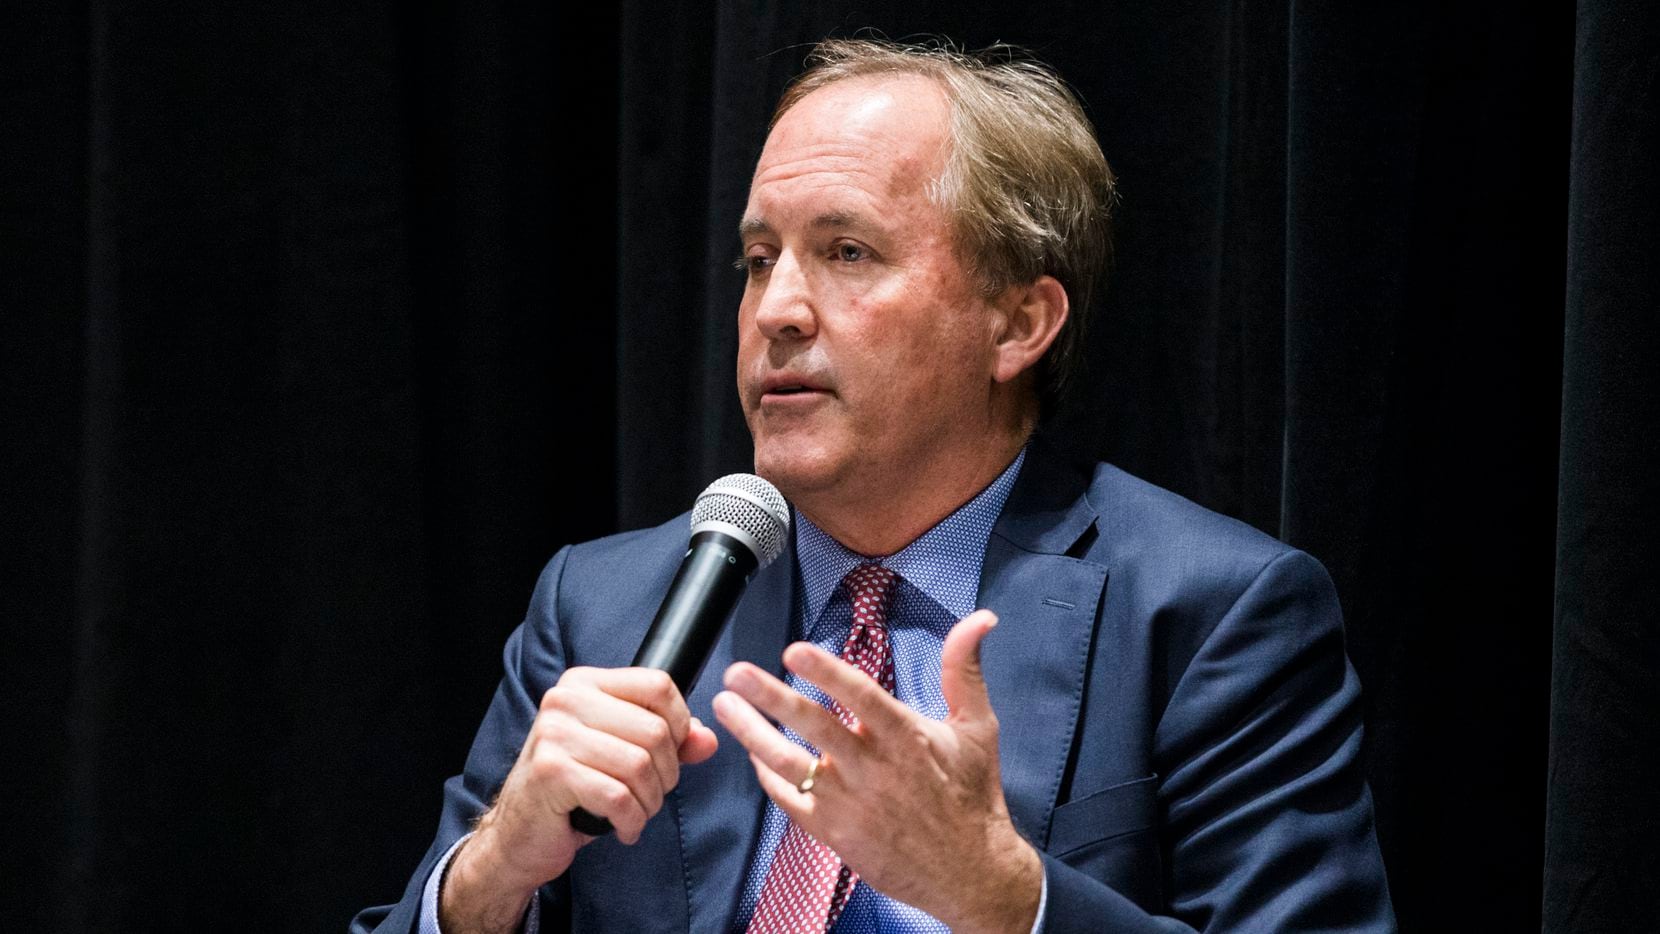 Texas Attorney General Ken Paxton is pictured on Wednesday, February 26, 2020 at The Dallas Morning News Auditorium in Dallas. Several top employees have accused the Republican of serious crimes. Paxton says the allegations are false and has pointed the finger back at his accusers. (Ashley Landis/The Dallas Morning News)